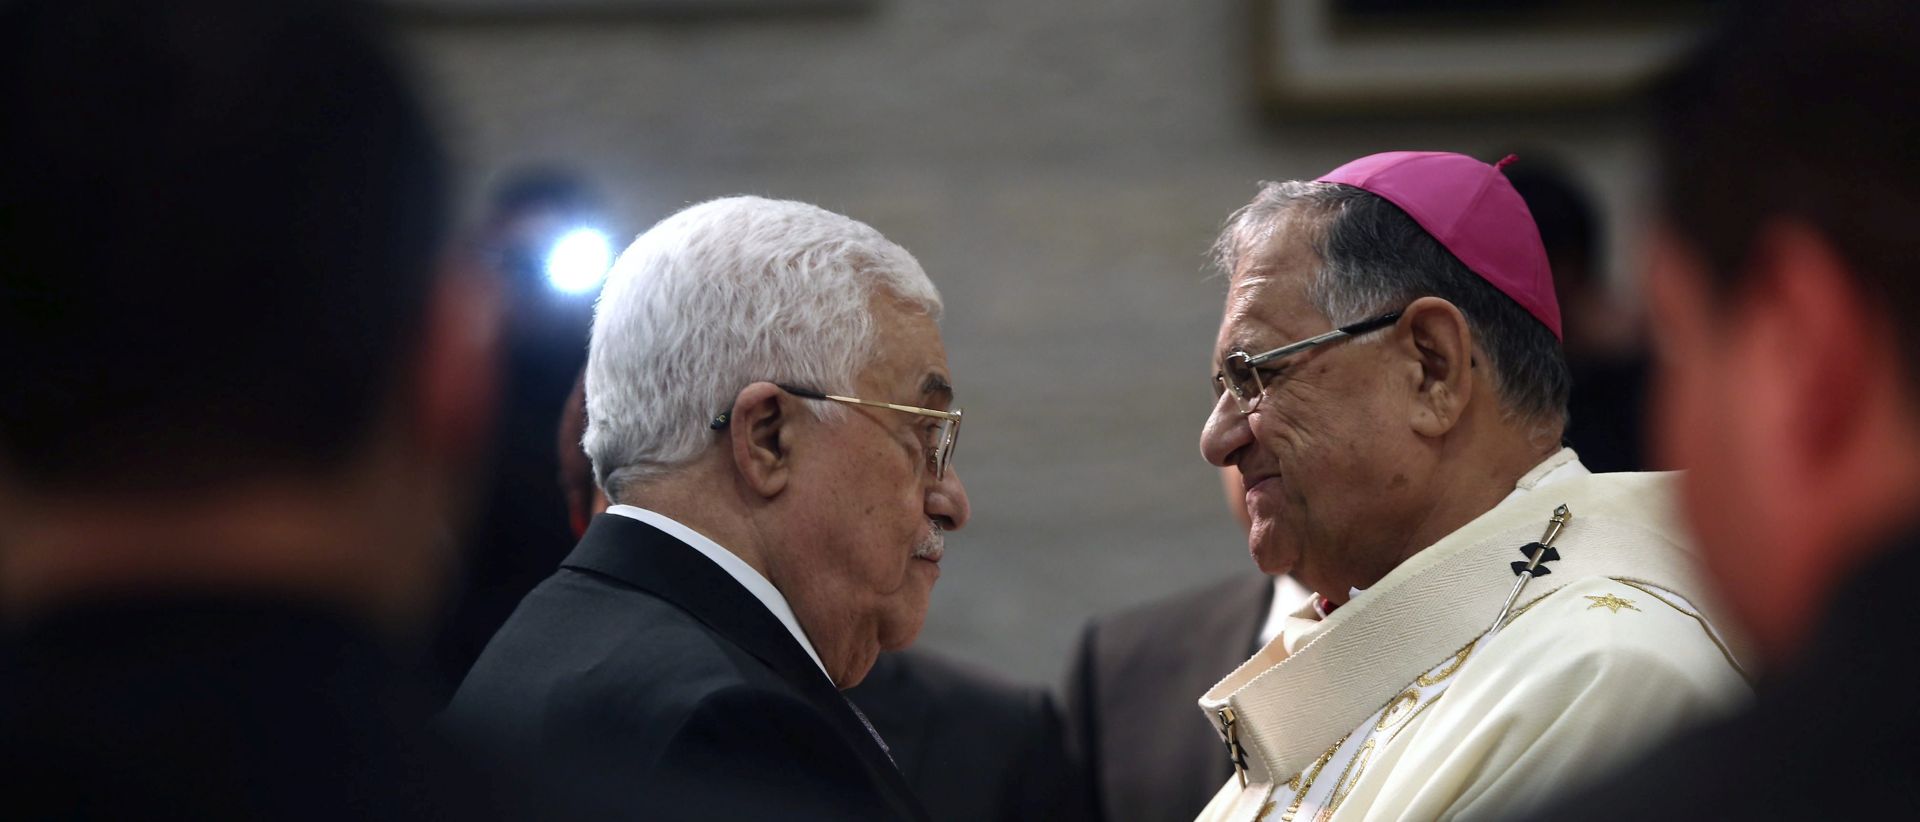 epa05080396 Palestinian President Mahmoud Abbas (L) greets the Latin Patriarch of Jerusalem Fouad Twal during a Christmas Midnight Mass at the Church of the Nativity in the town of Bethlehem, the West Bank, 25 December 2015.  EPA/FADI AROURI/POOL